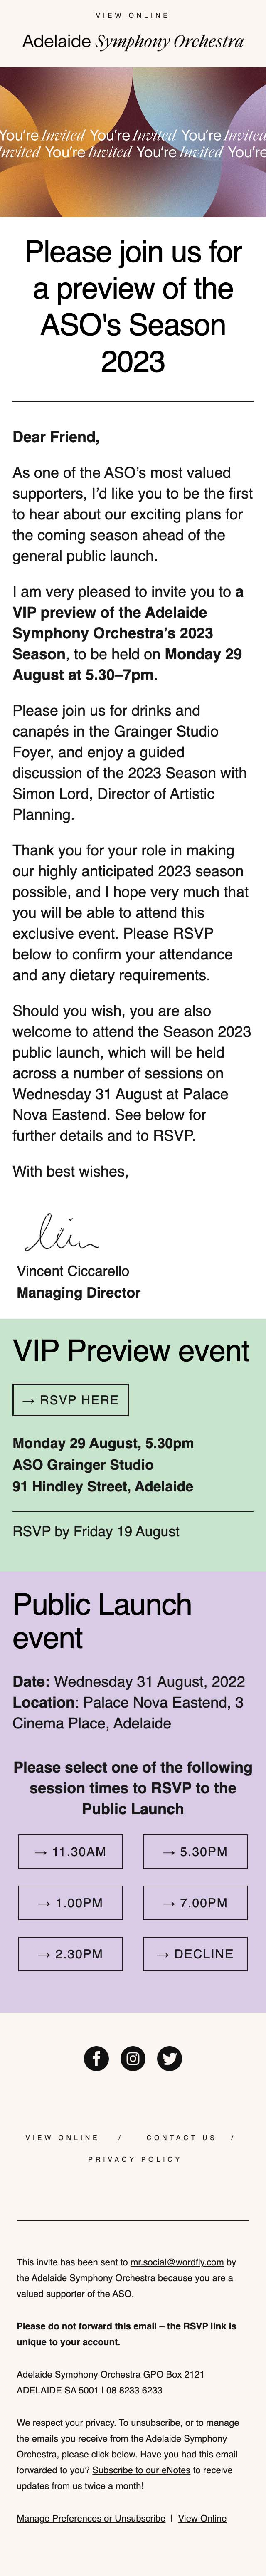 You're invited | Season 2023 VIP Preview 🎶 ✨ - mobile view